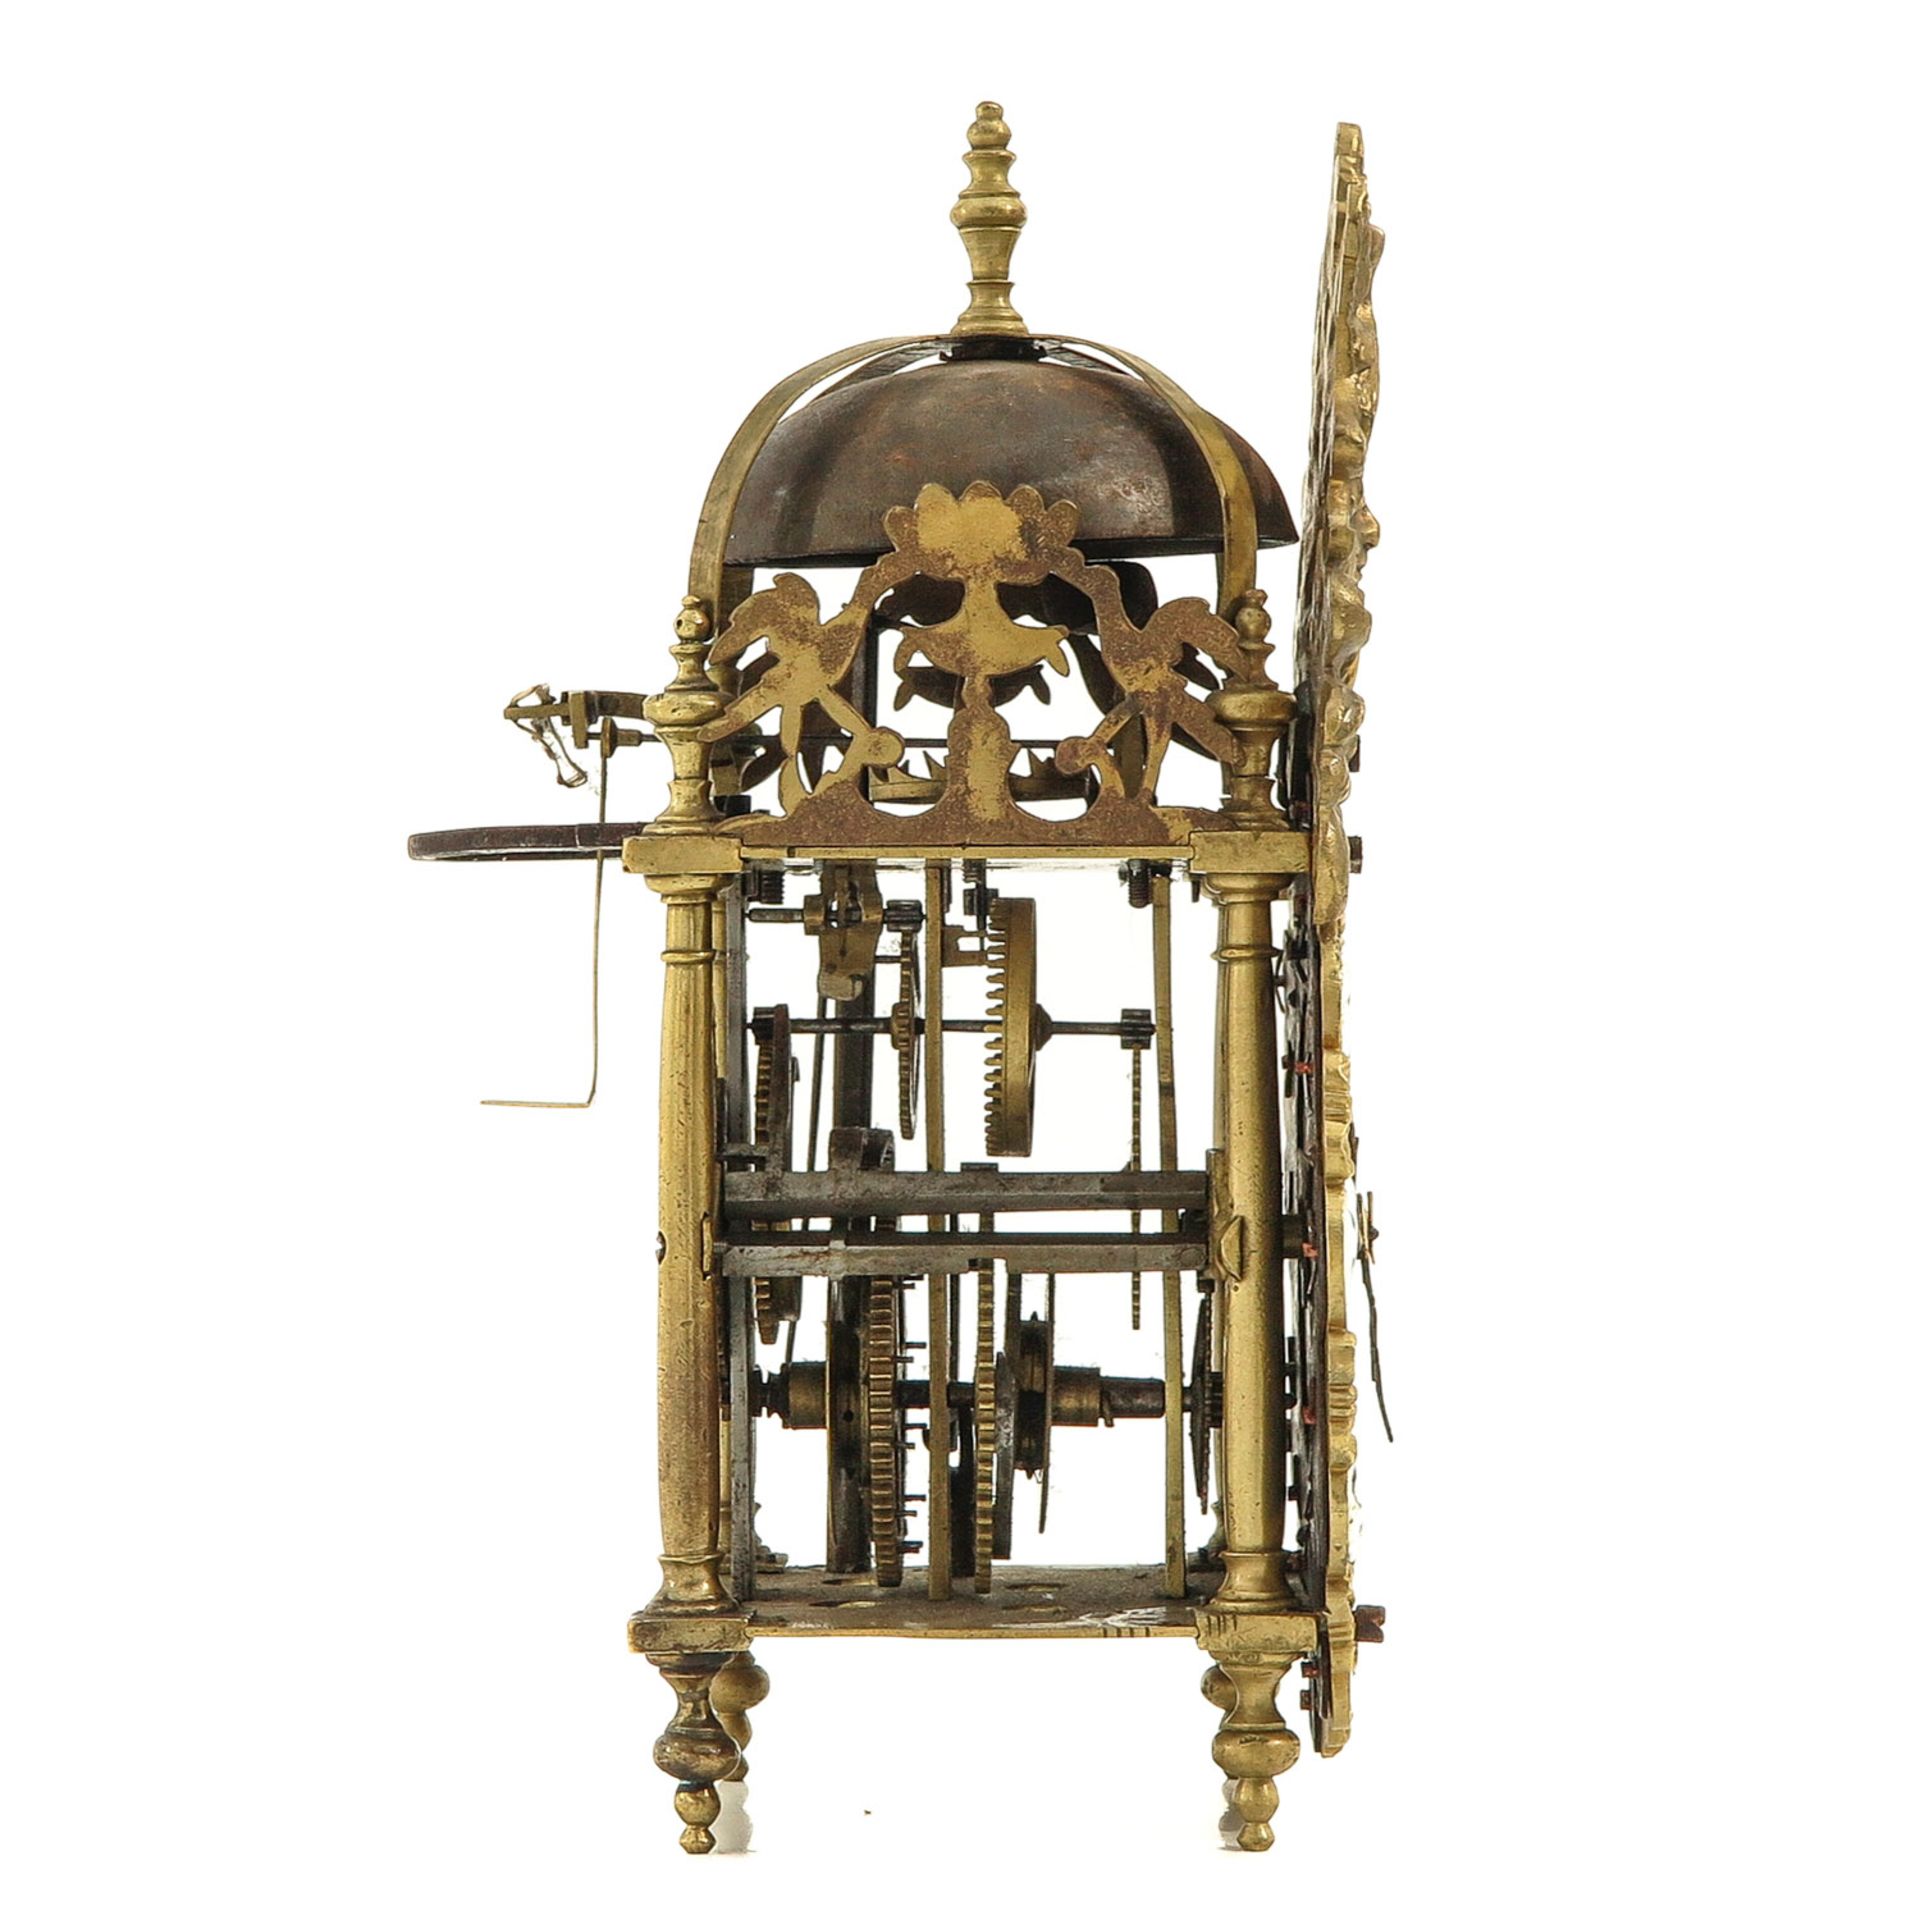 An 18th Century French Lantern Clock - Image 8 of 10